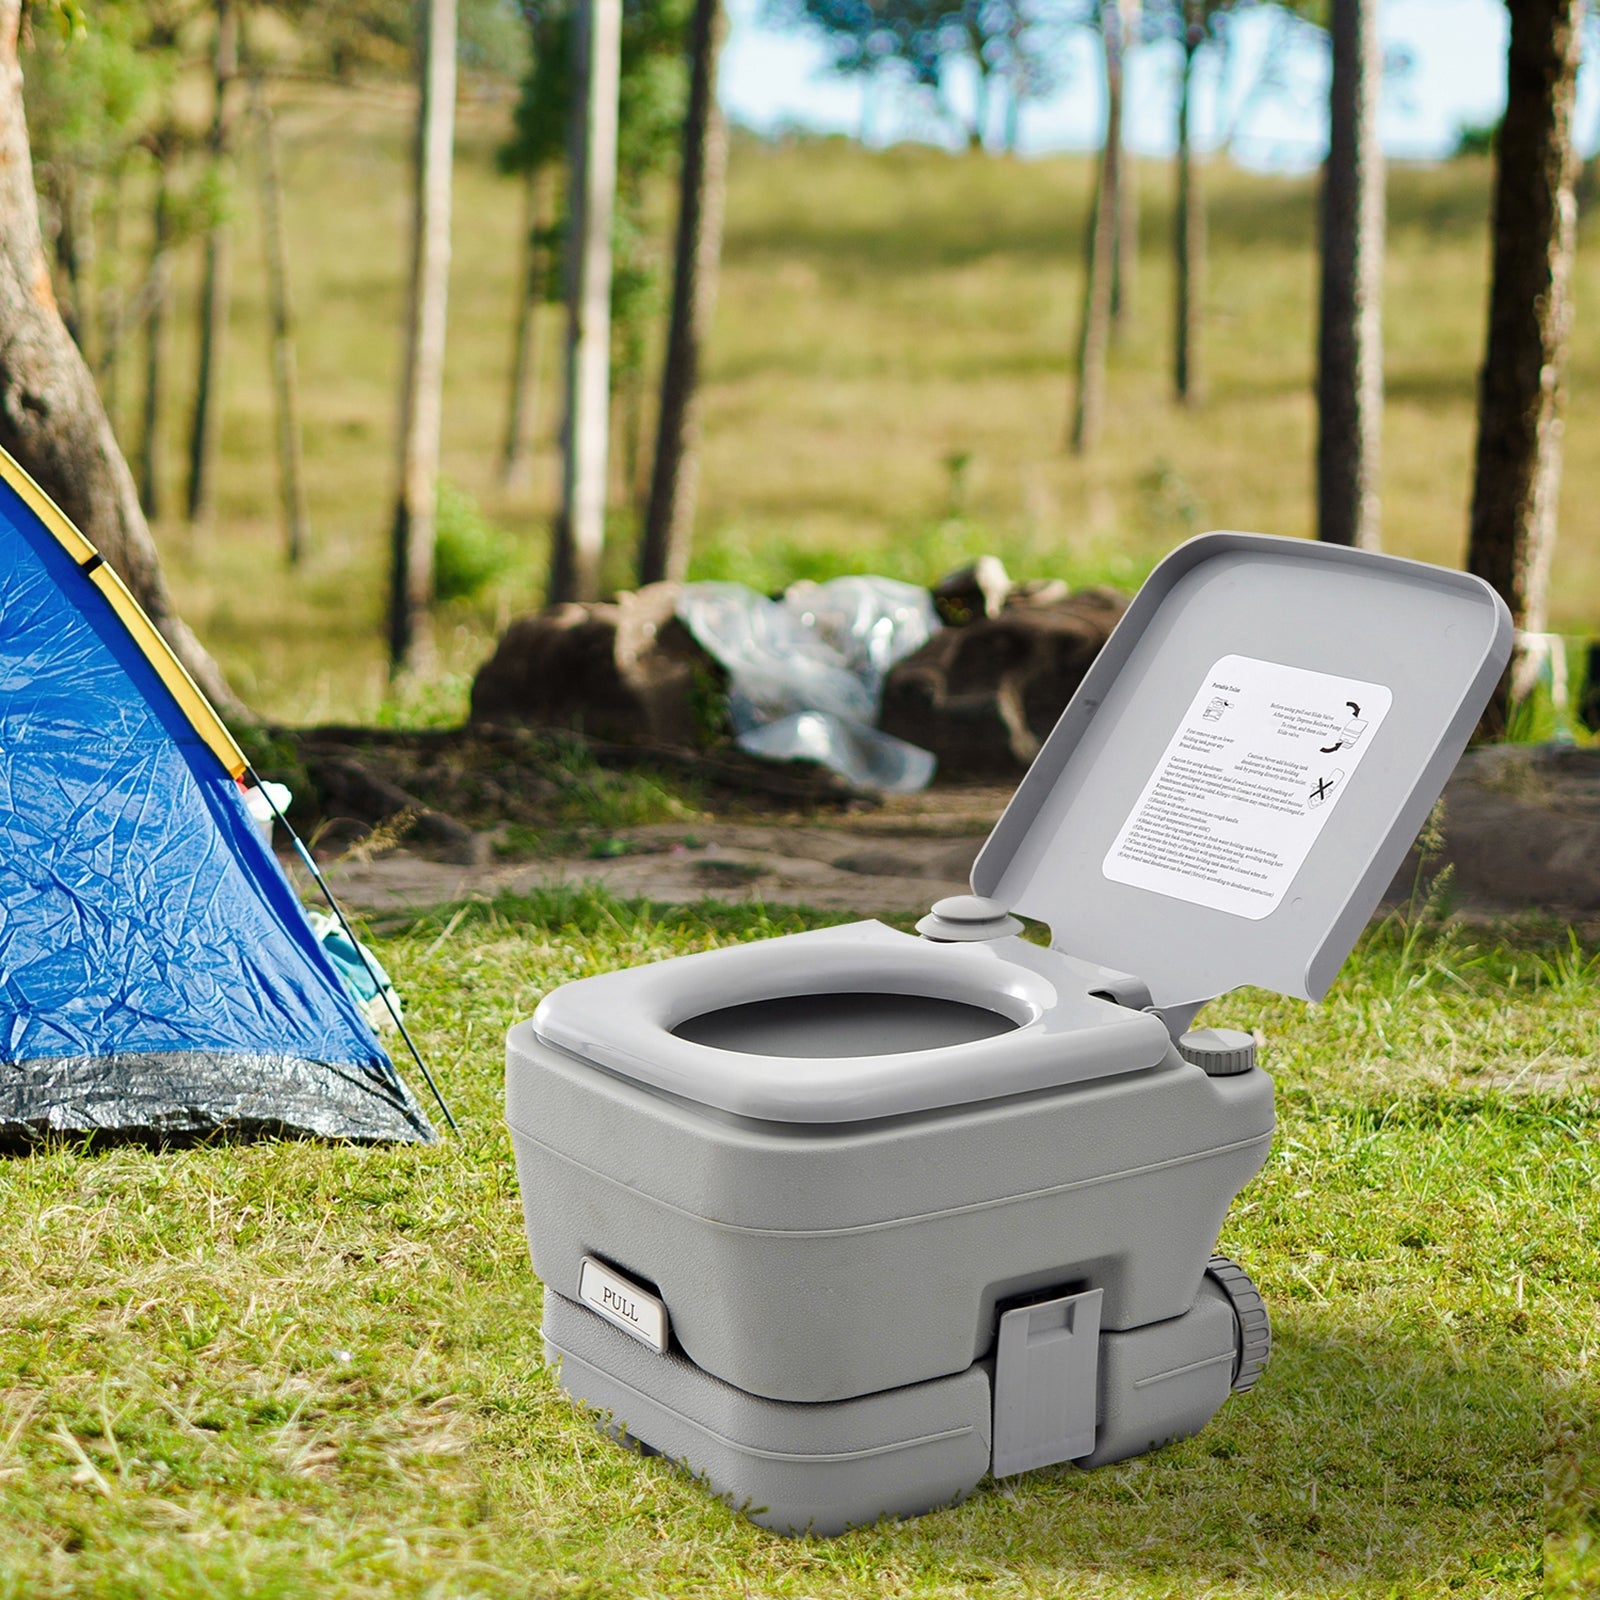 10L Portable Travel Toilet Outdoor Camping Picnic with 2 Detachable Tanks & Push-button Operation, Grey-1